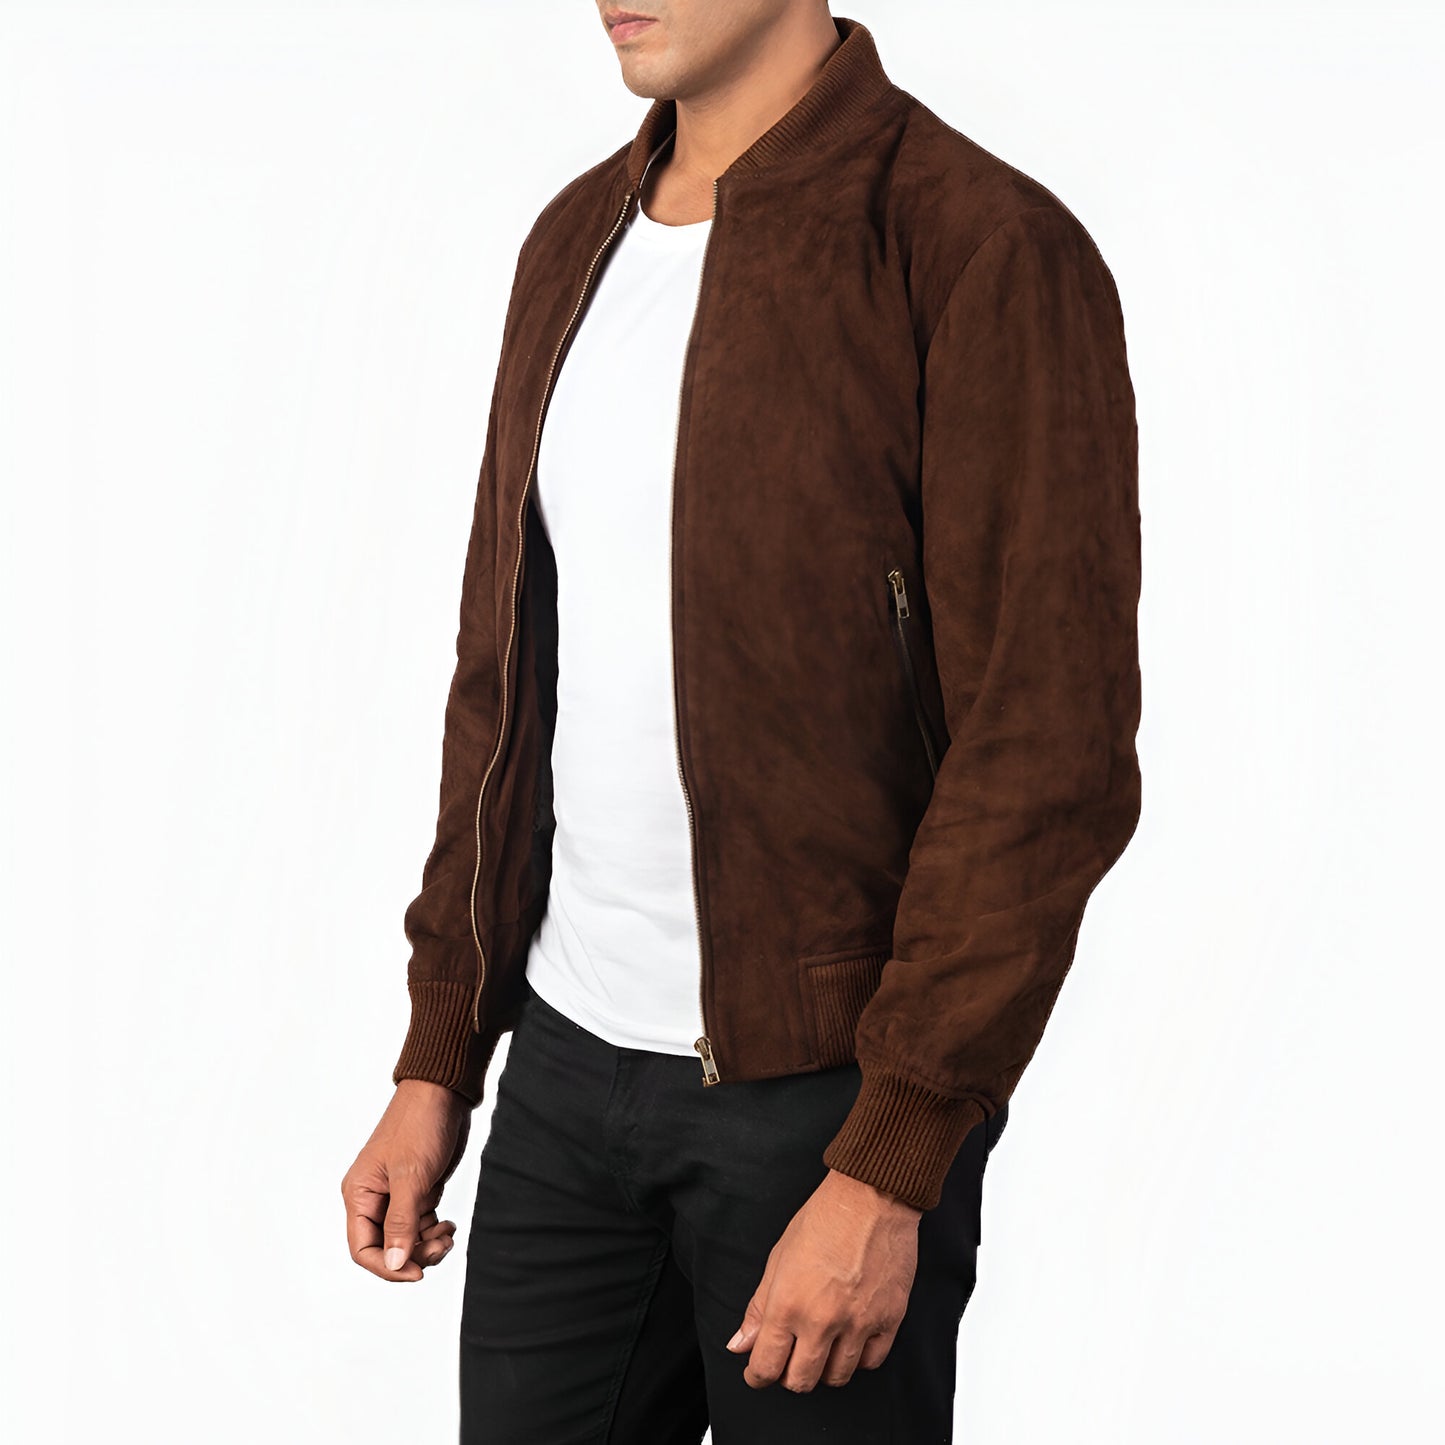 Tom Brown Suede Leather Bomber Jacket